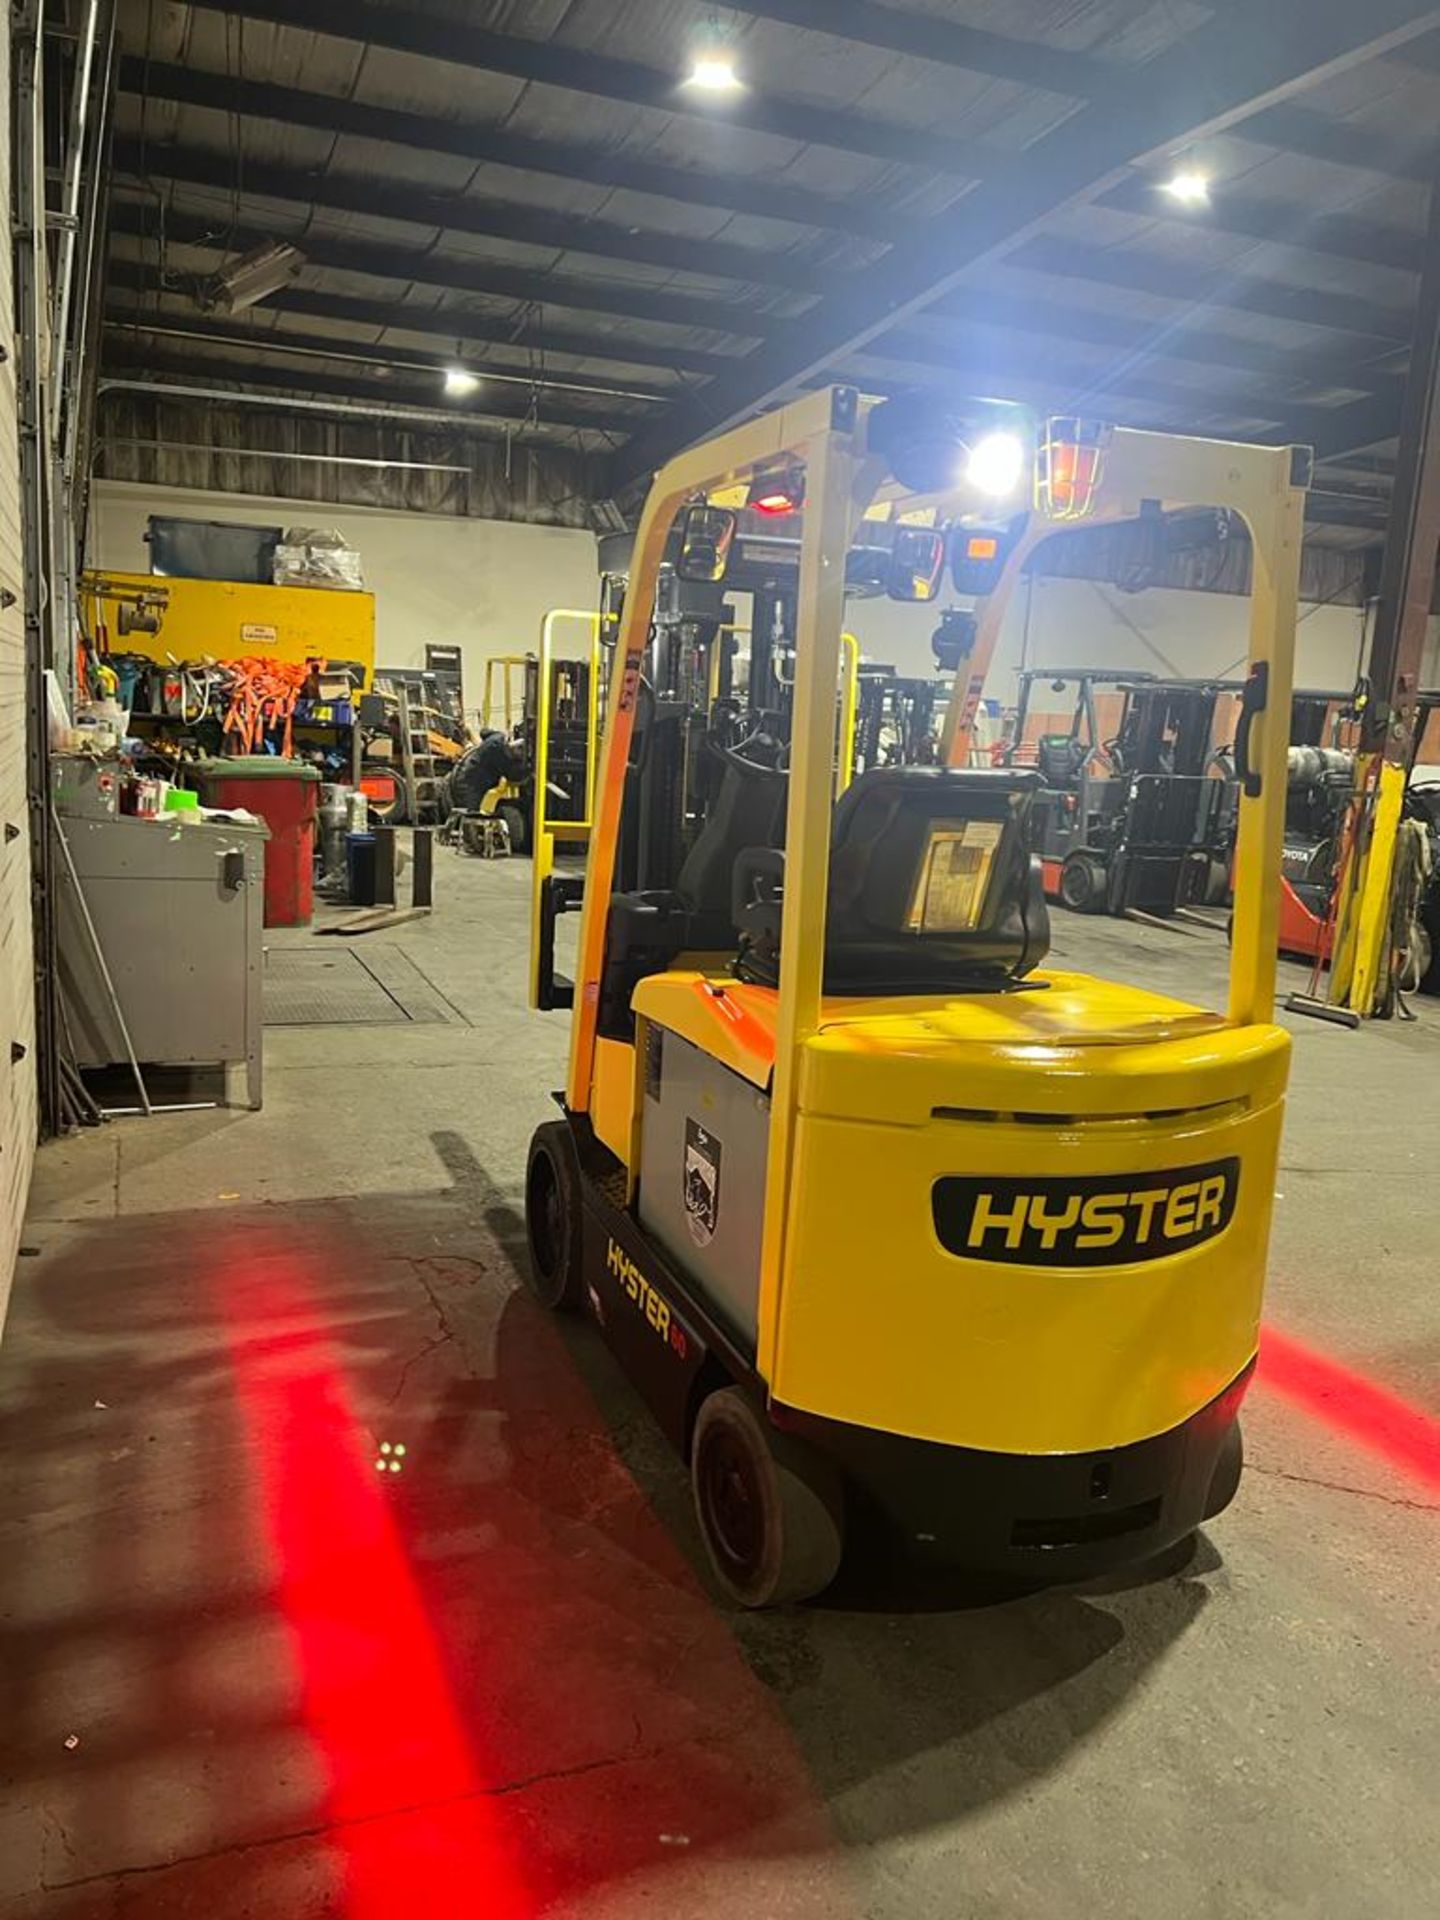 2018 Hyster 6000lbs Capacity Forklift Electric 36V battery with Sideshift & 4 stage mast with Safety - Image 4 of 4